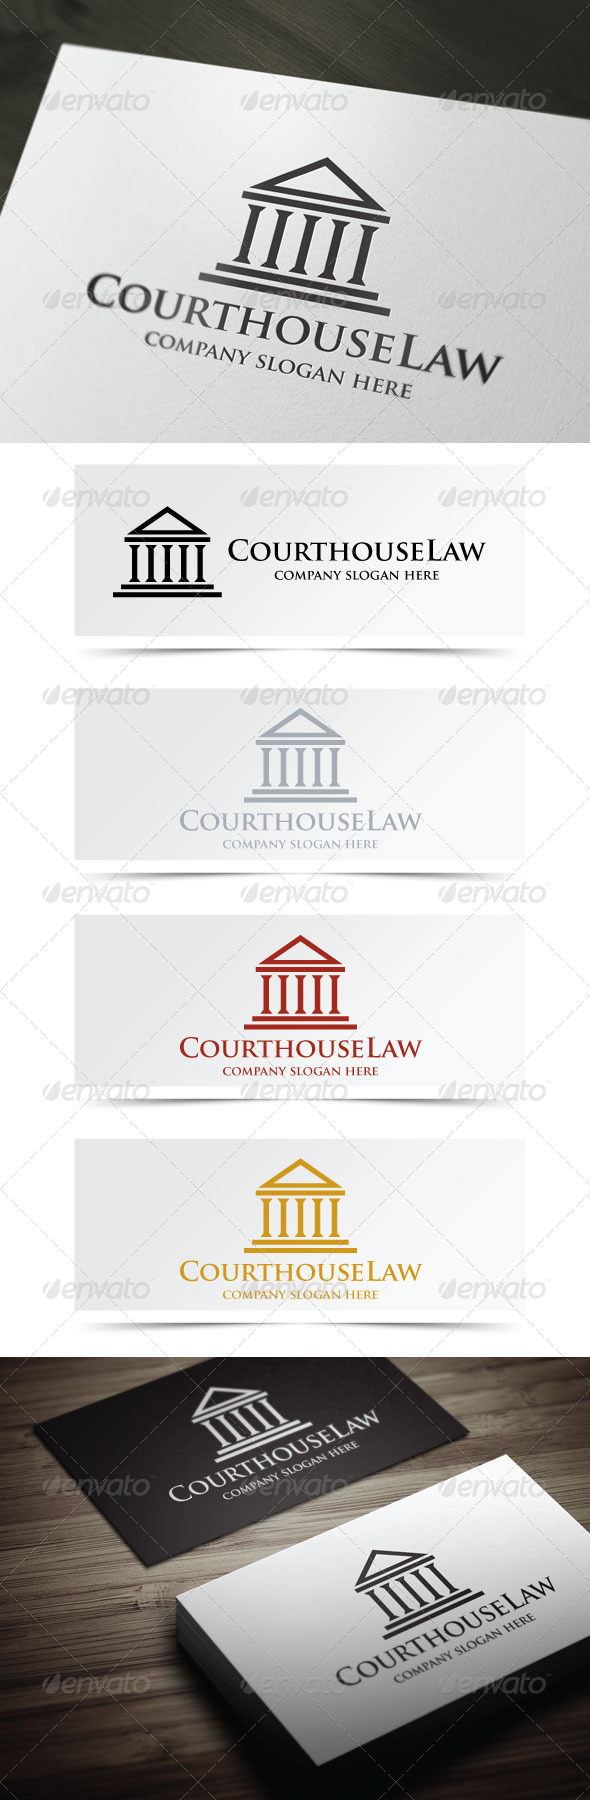 Courthouse Law